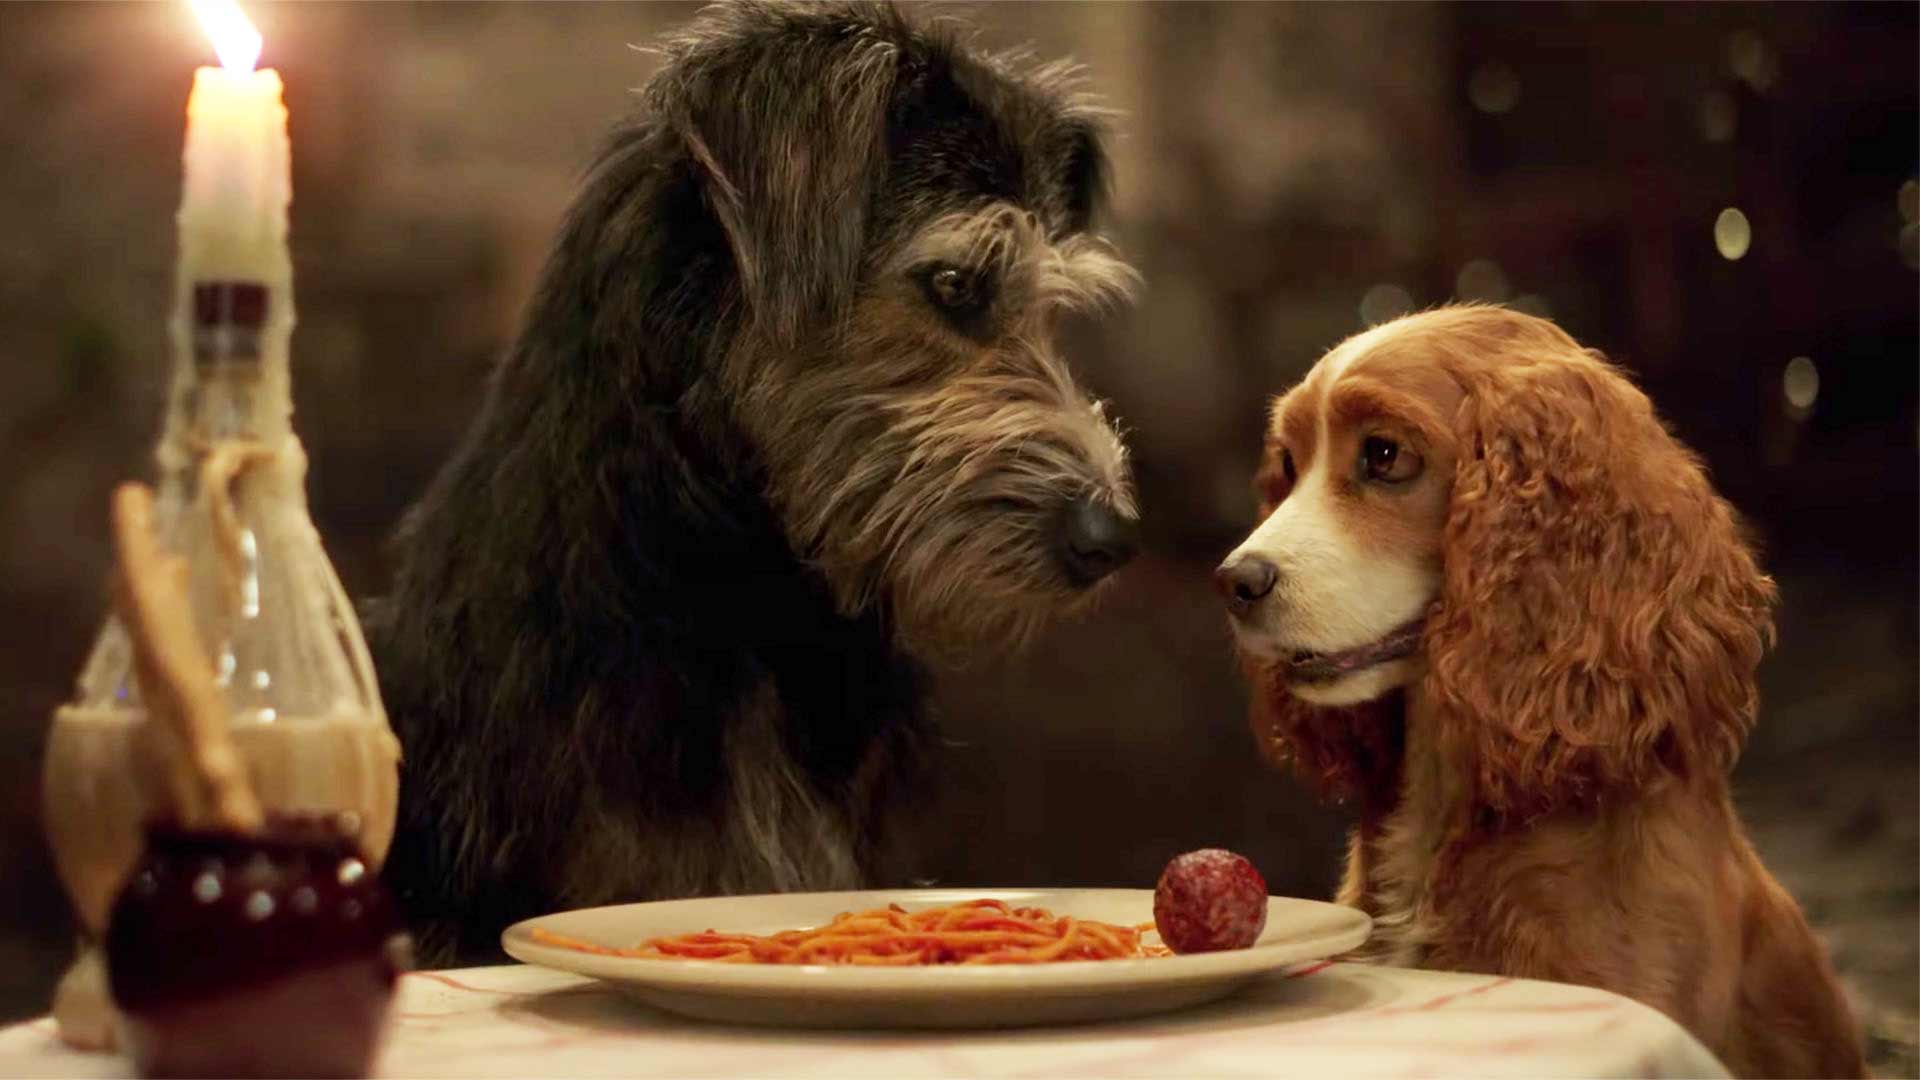 The Adorable Trailer for Disney's Live-Action 'Lady and the Tramp' Remake Is Here